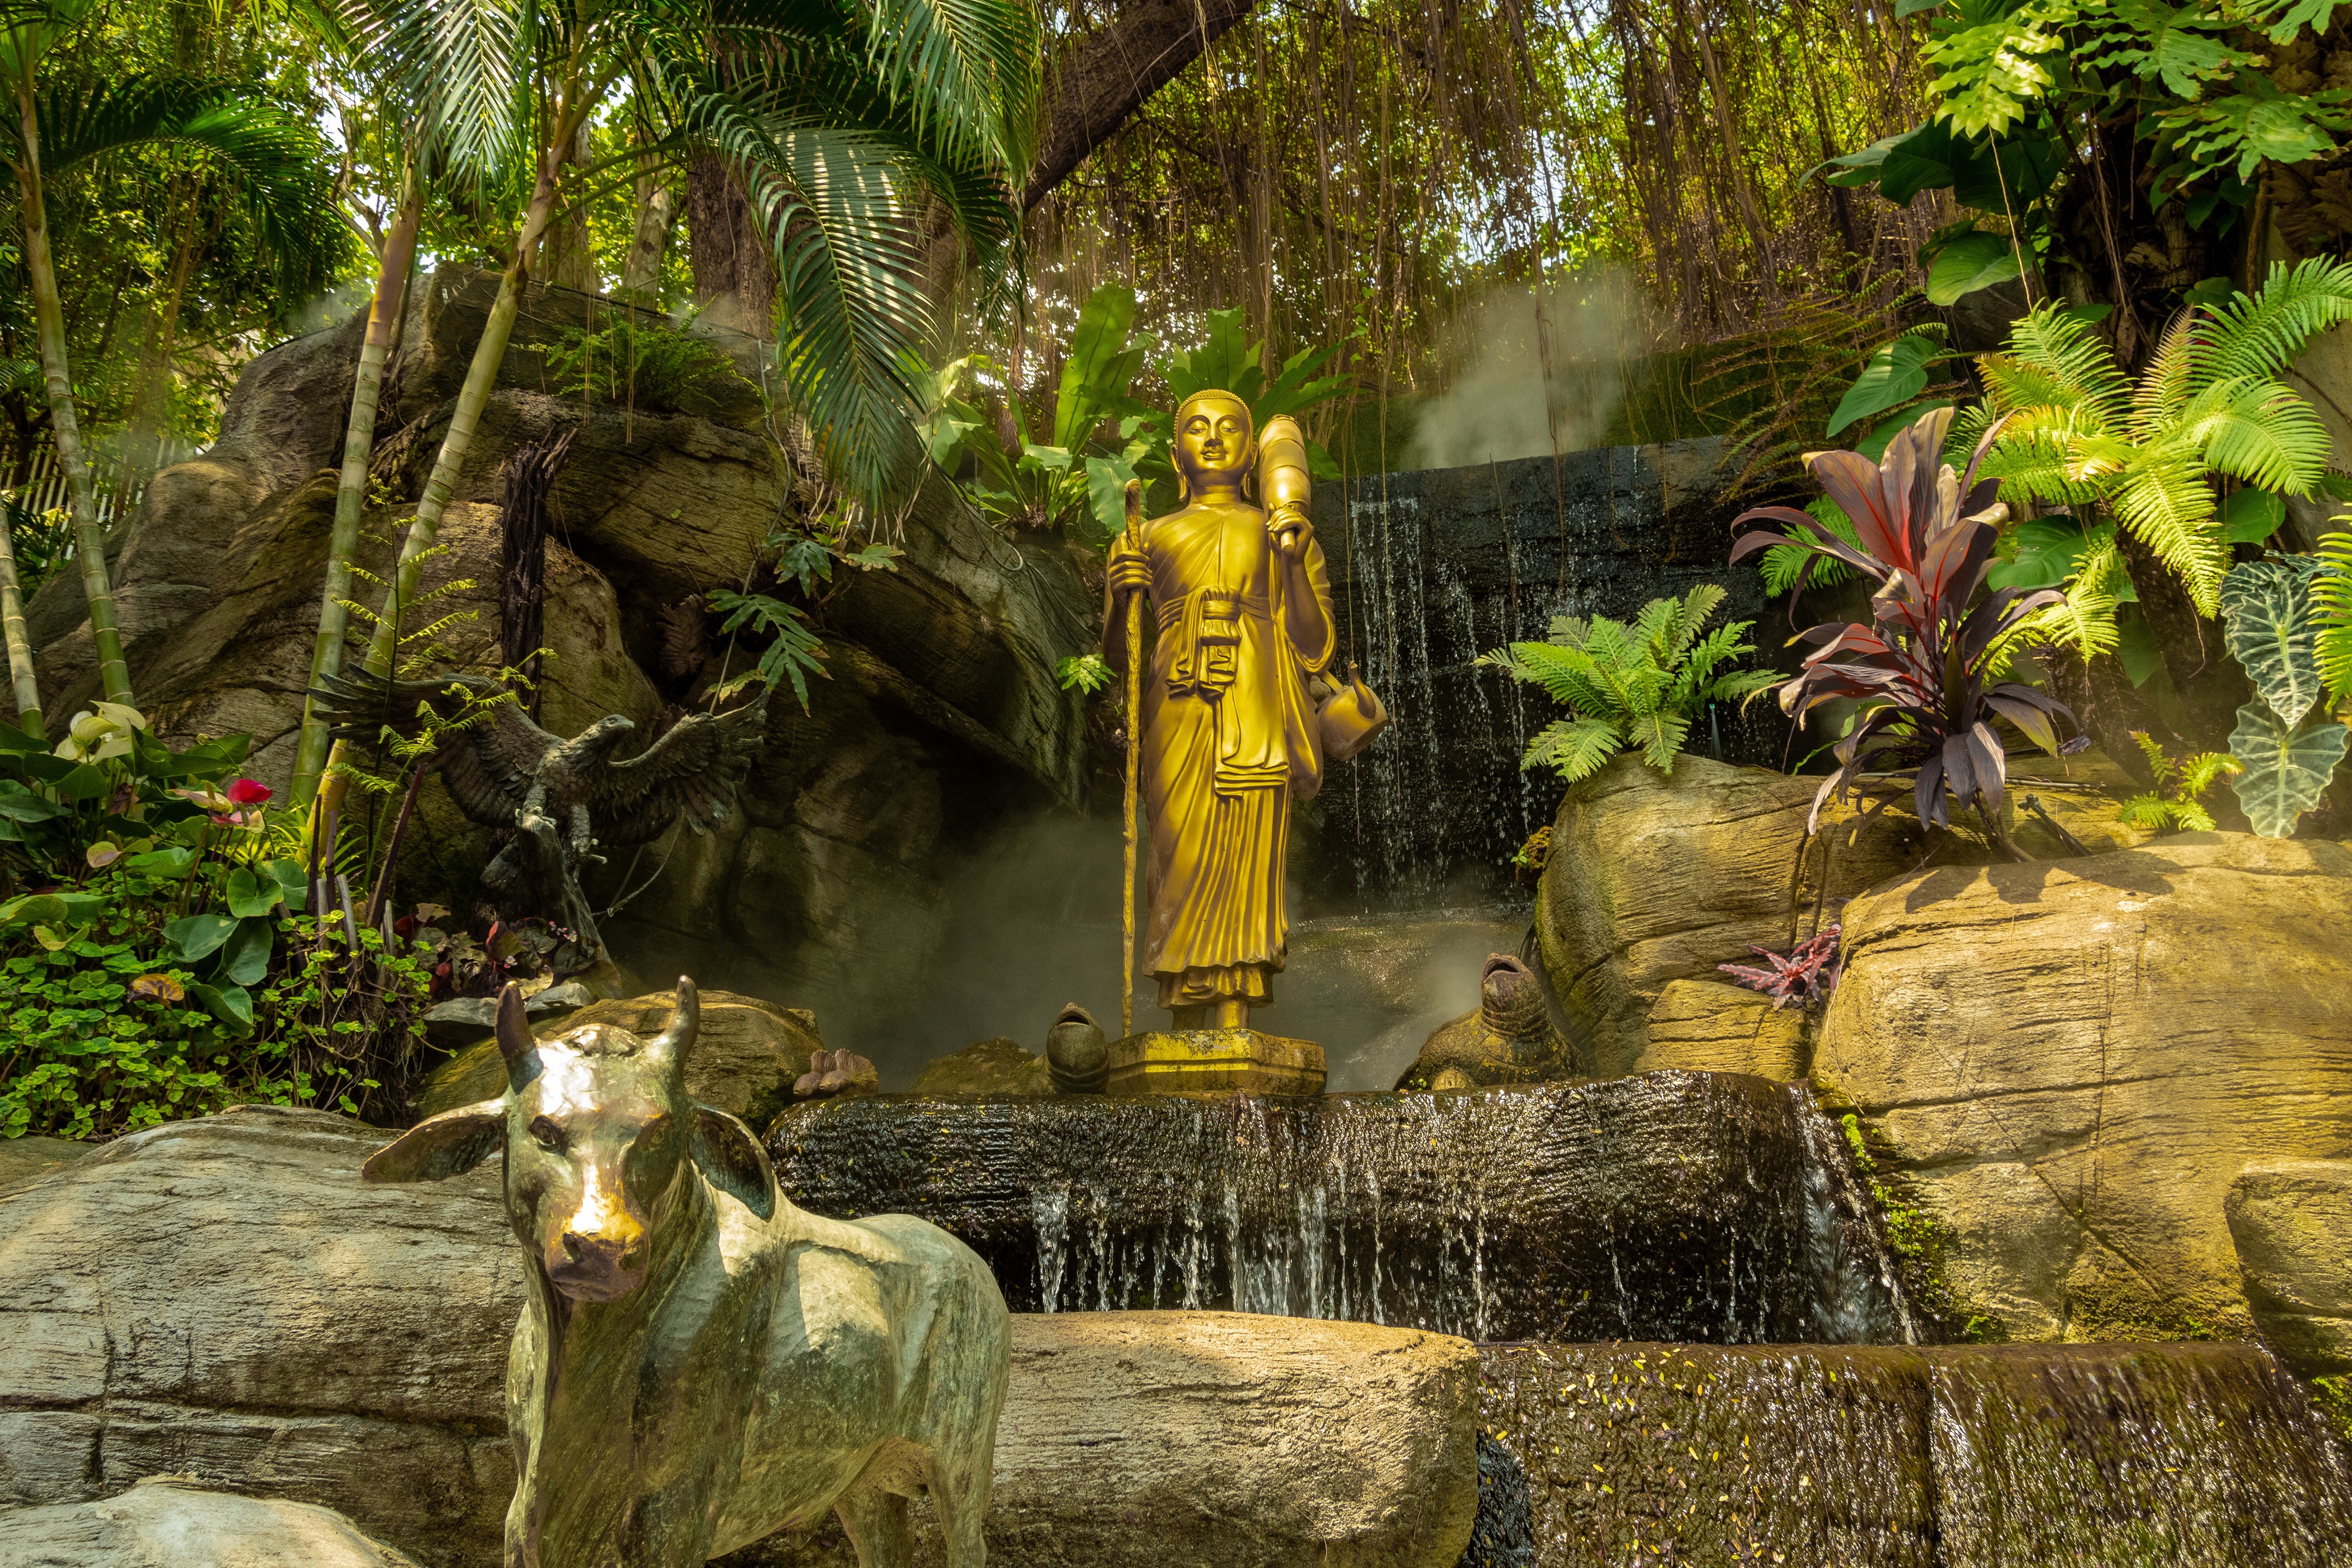 Statues and Waterfall in a Garden surrounded by Ferns by kmarius